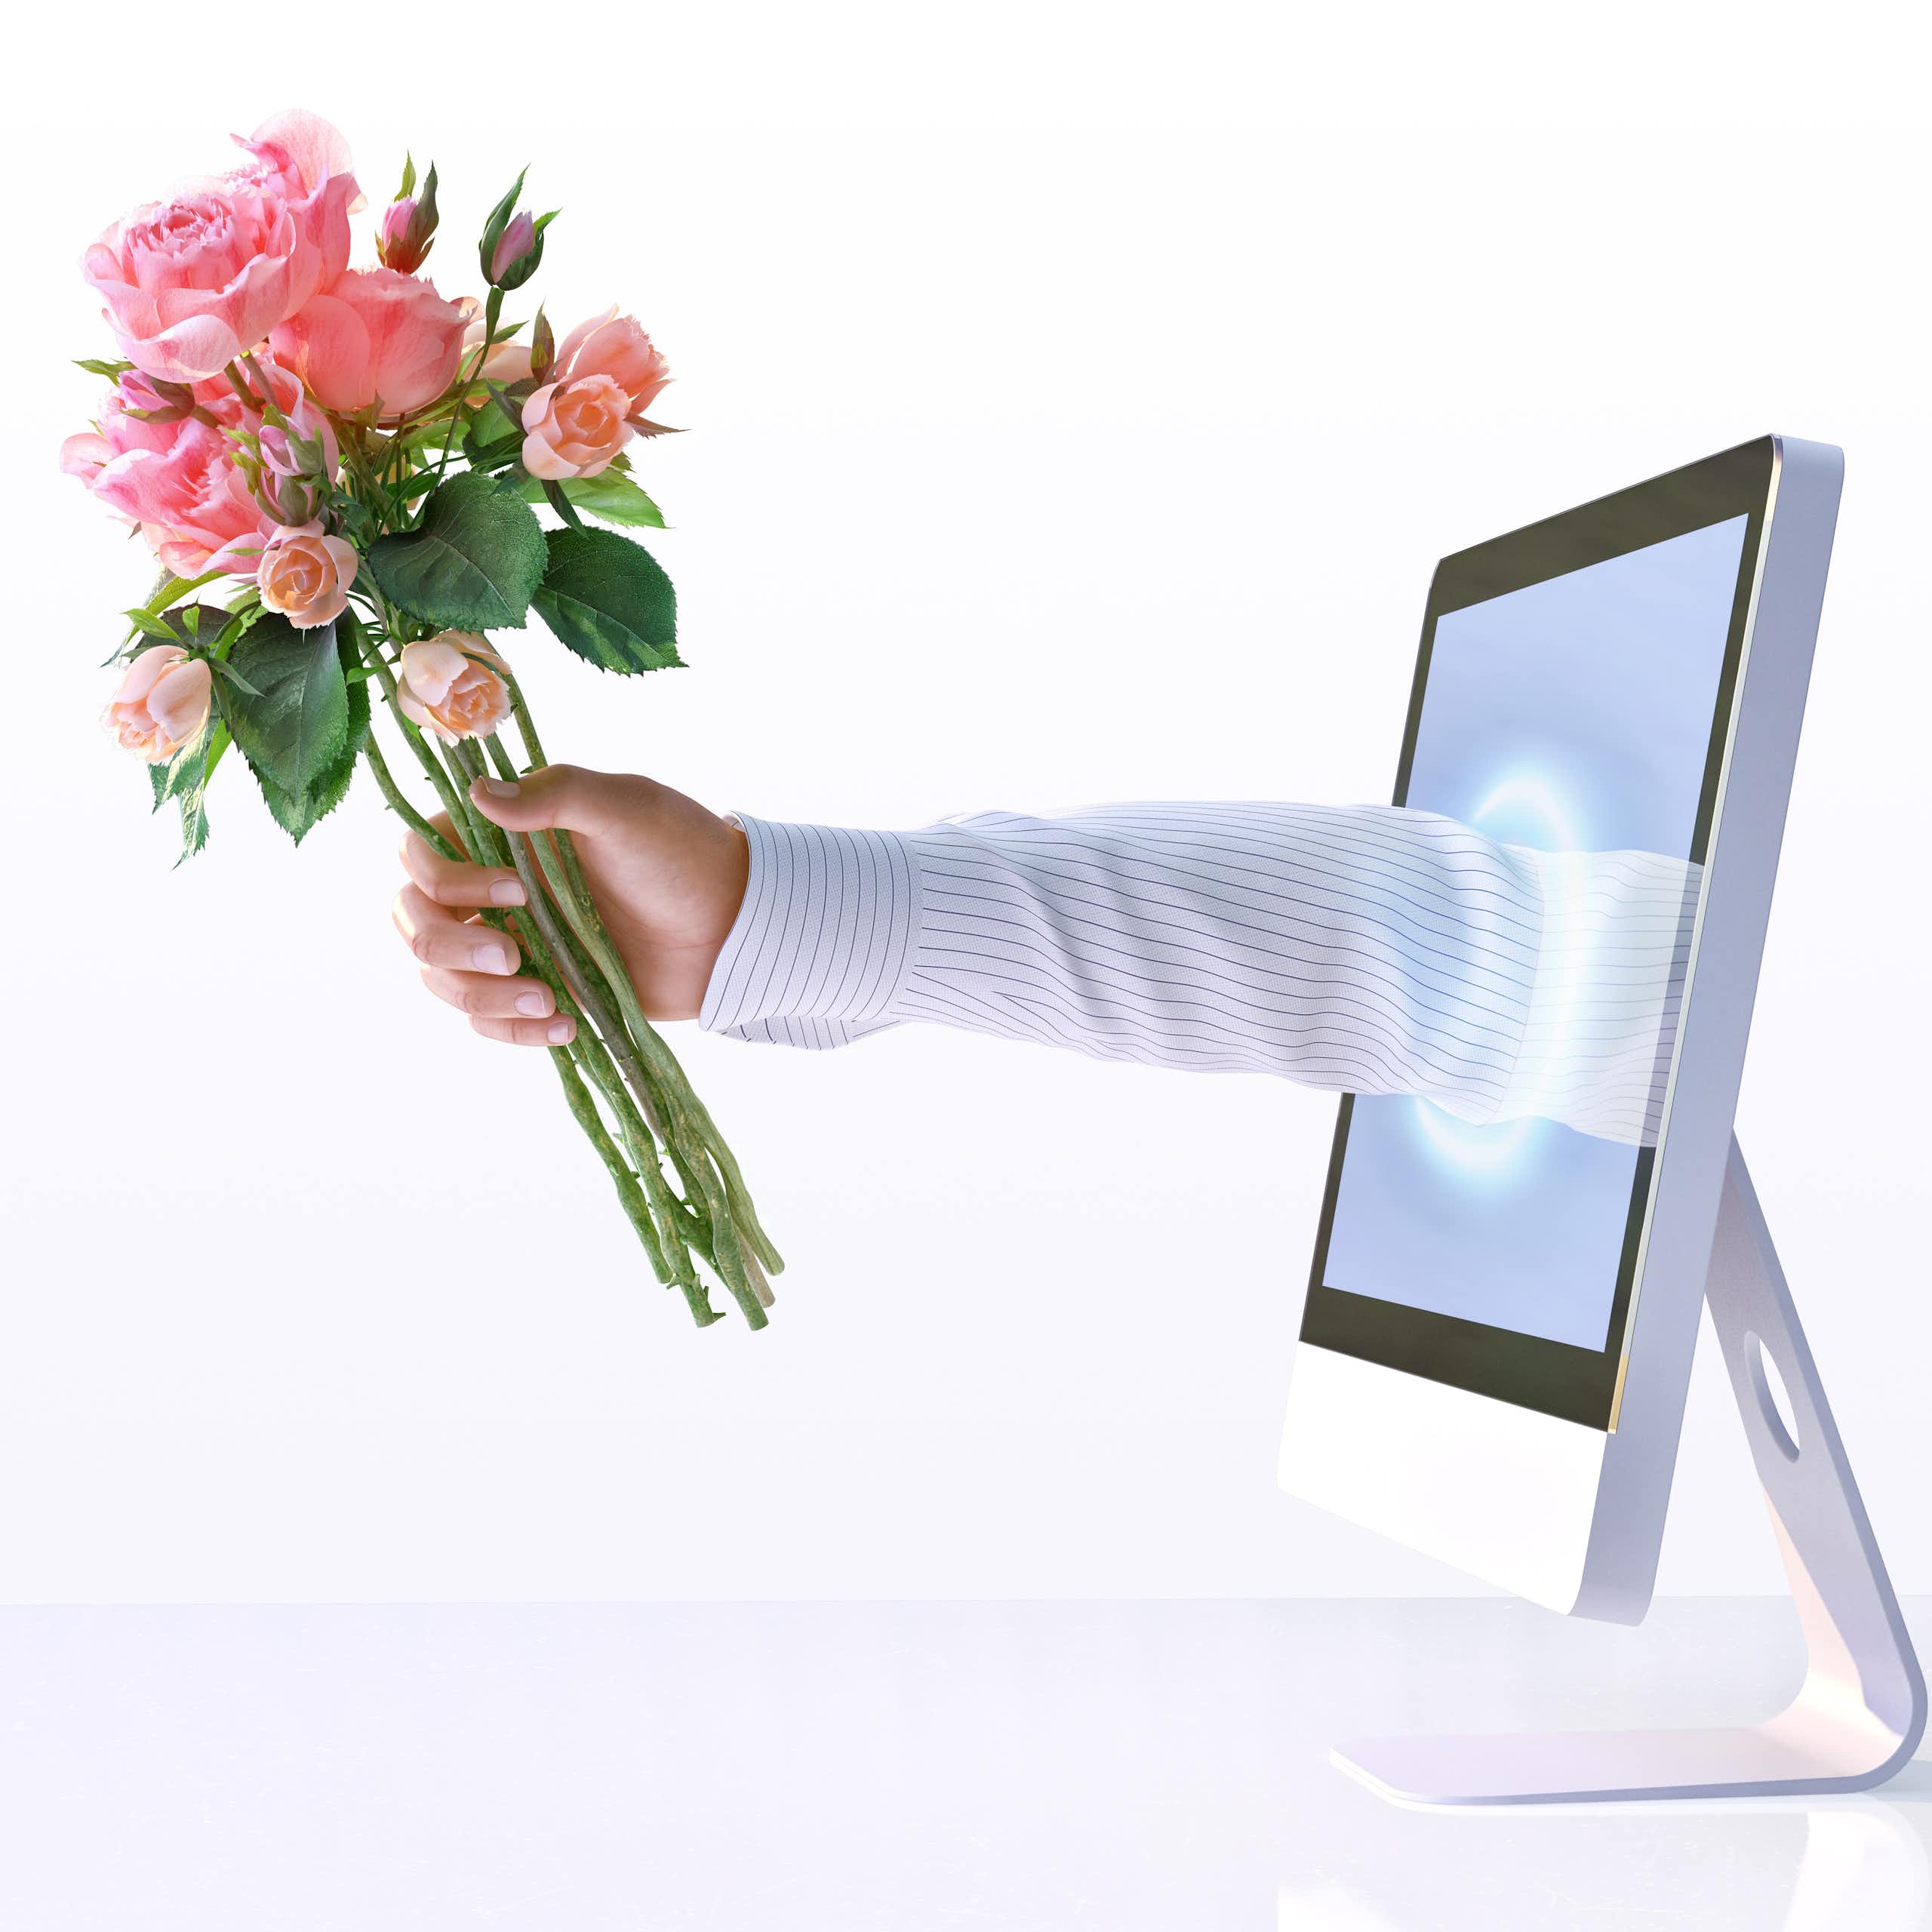 an arm reaching out from a computer screen, holding bouquet of roses